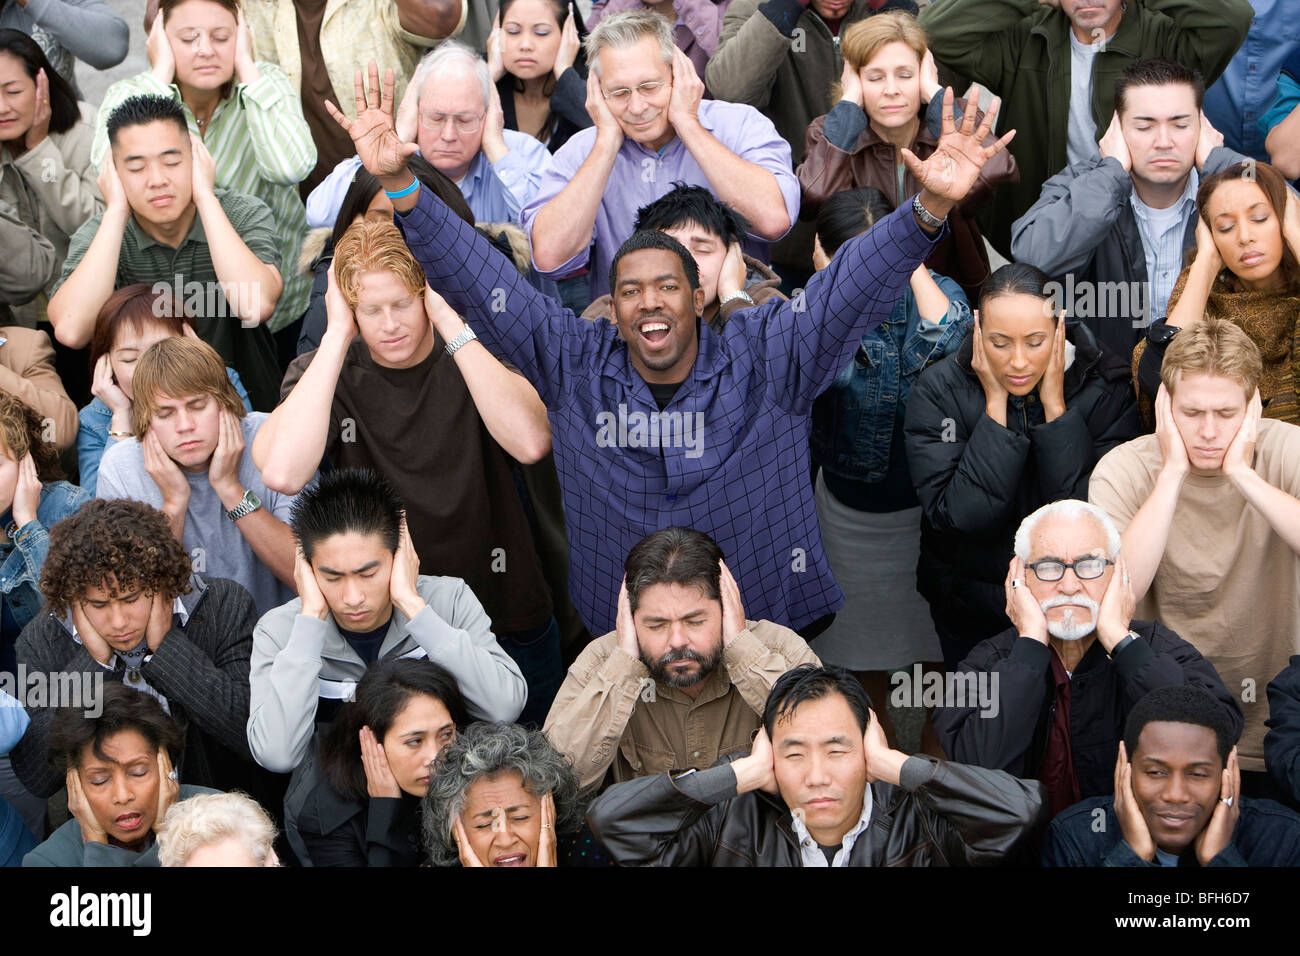 Man celebrating among crowd covering ears Stock Photo